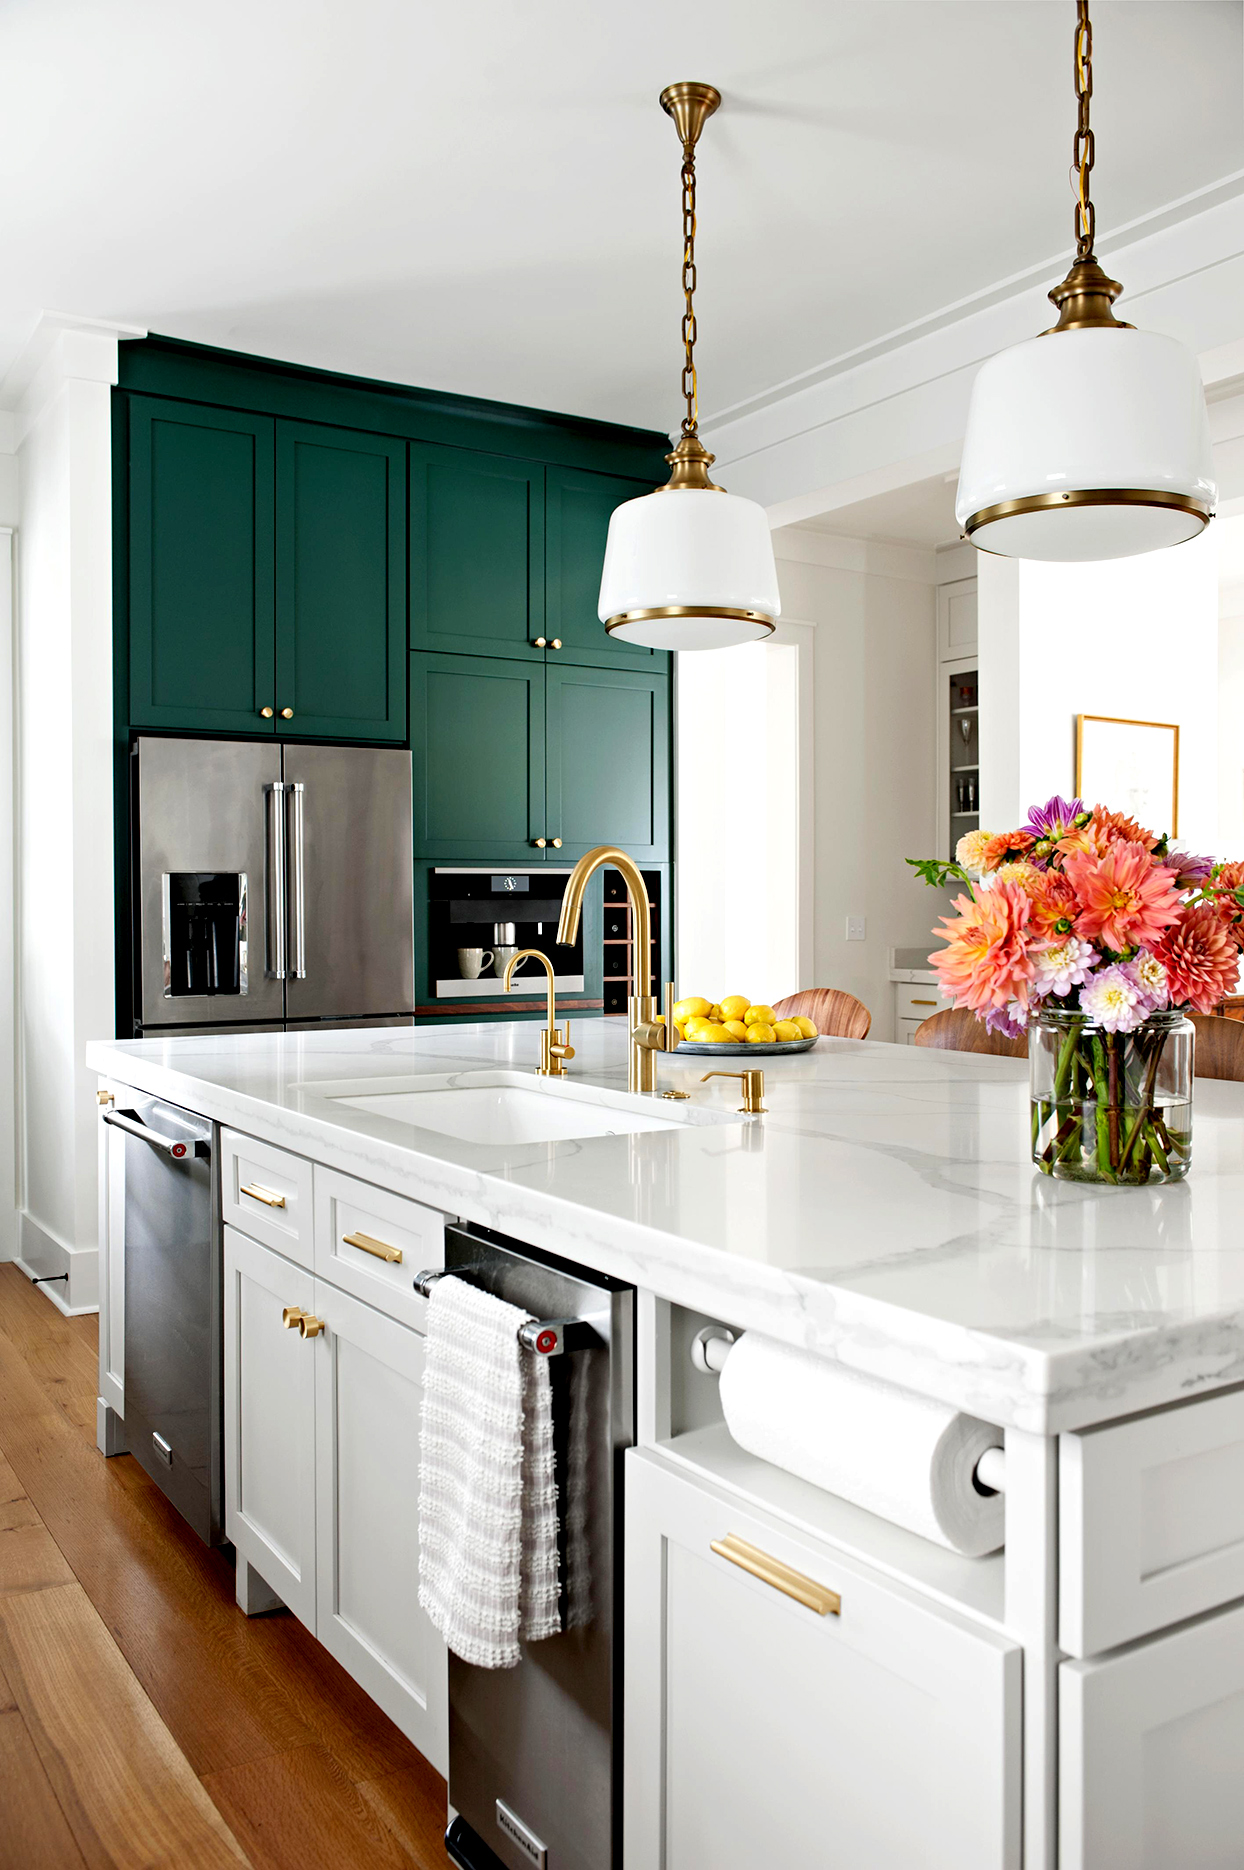 Create the Most Comfortable Kitchen Layout